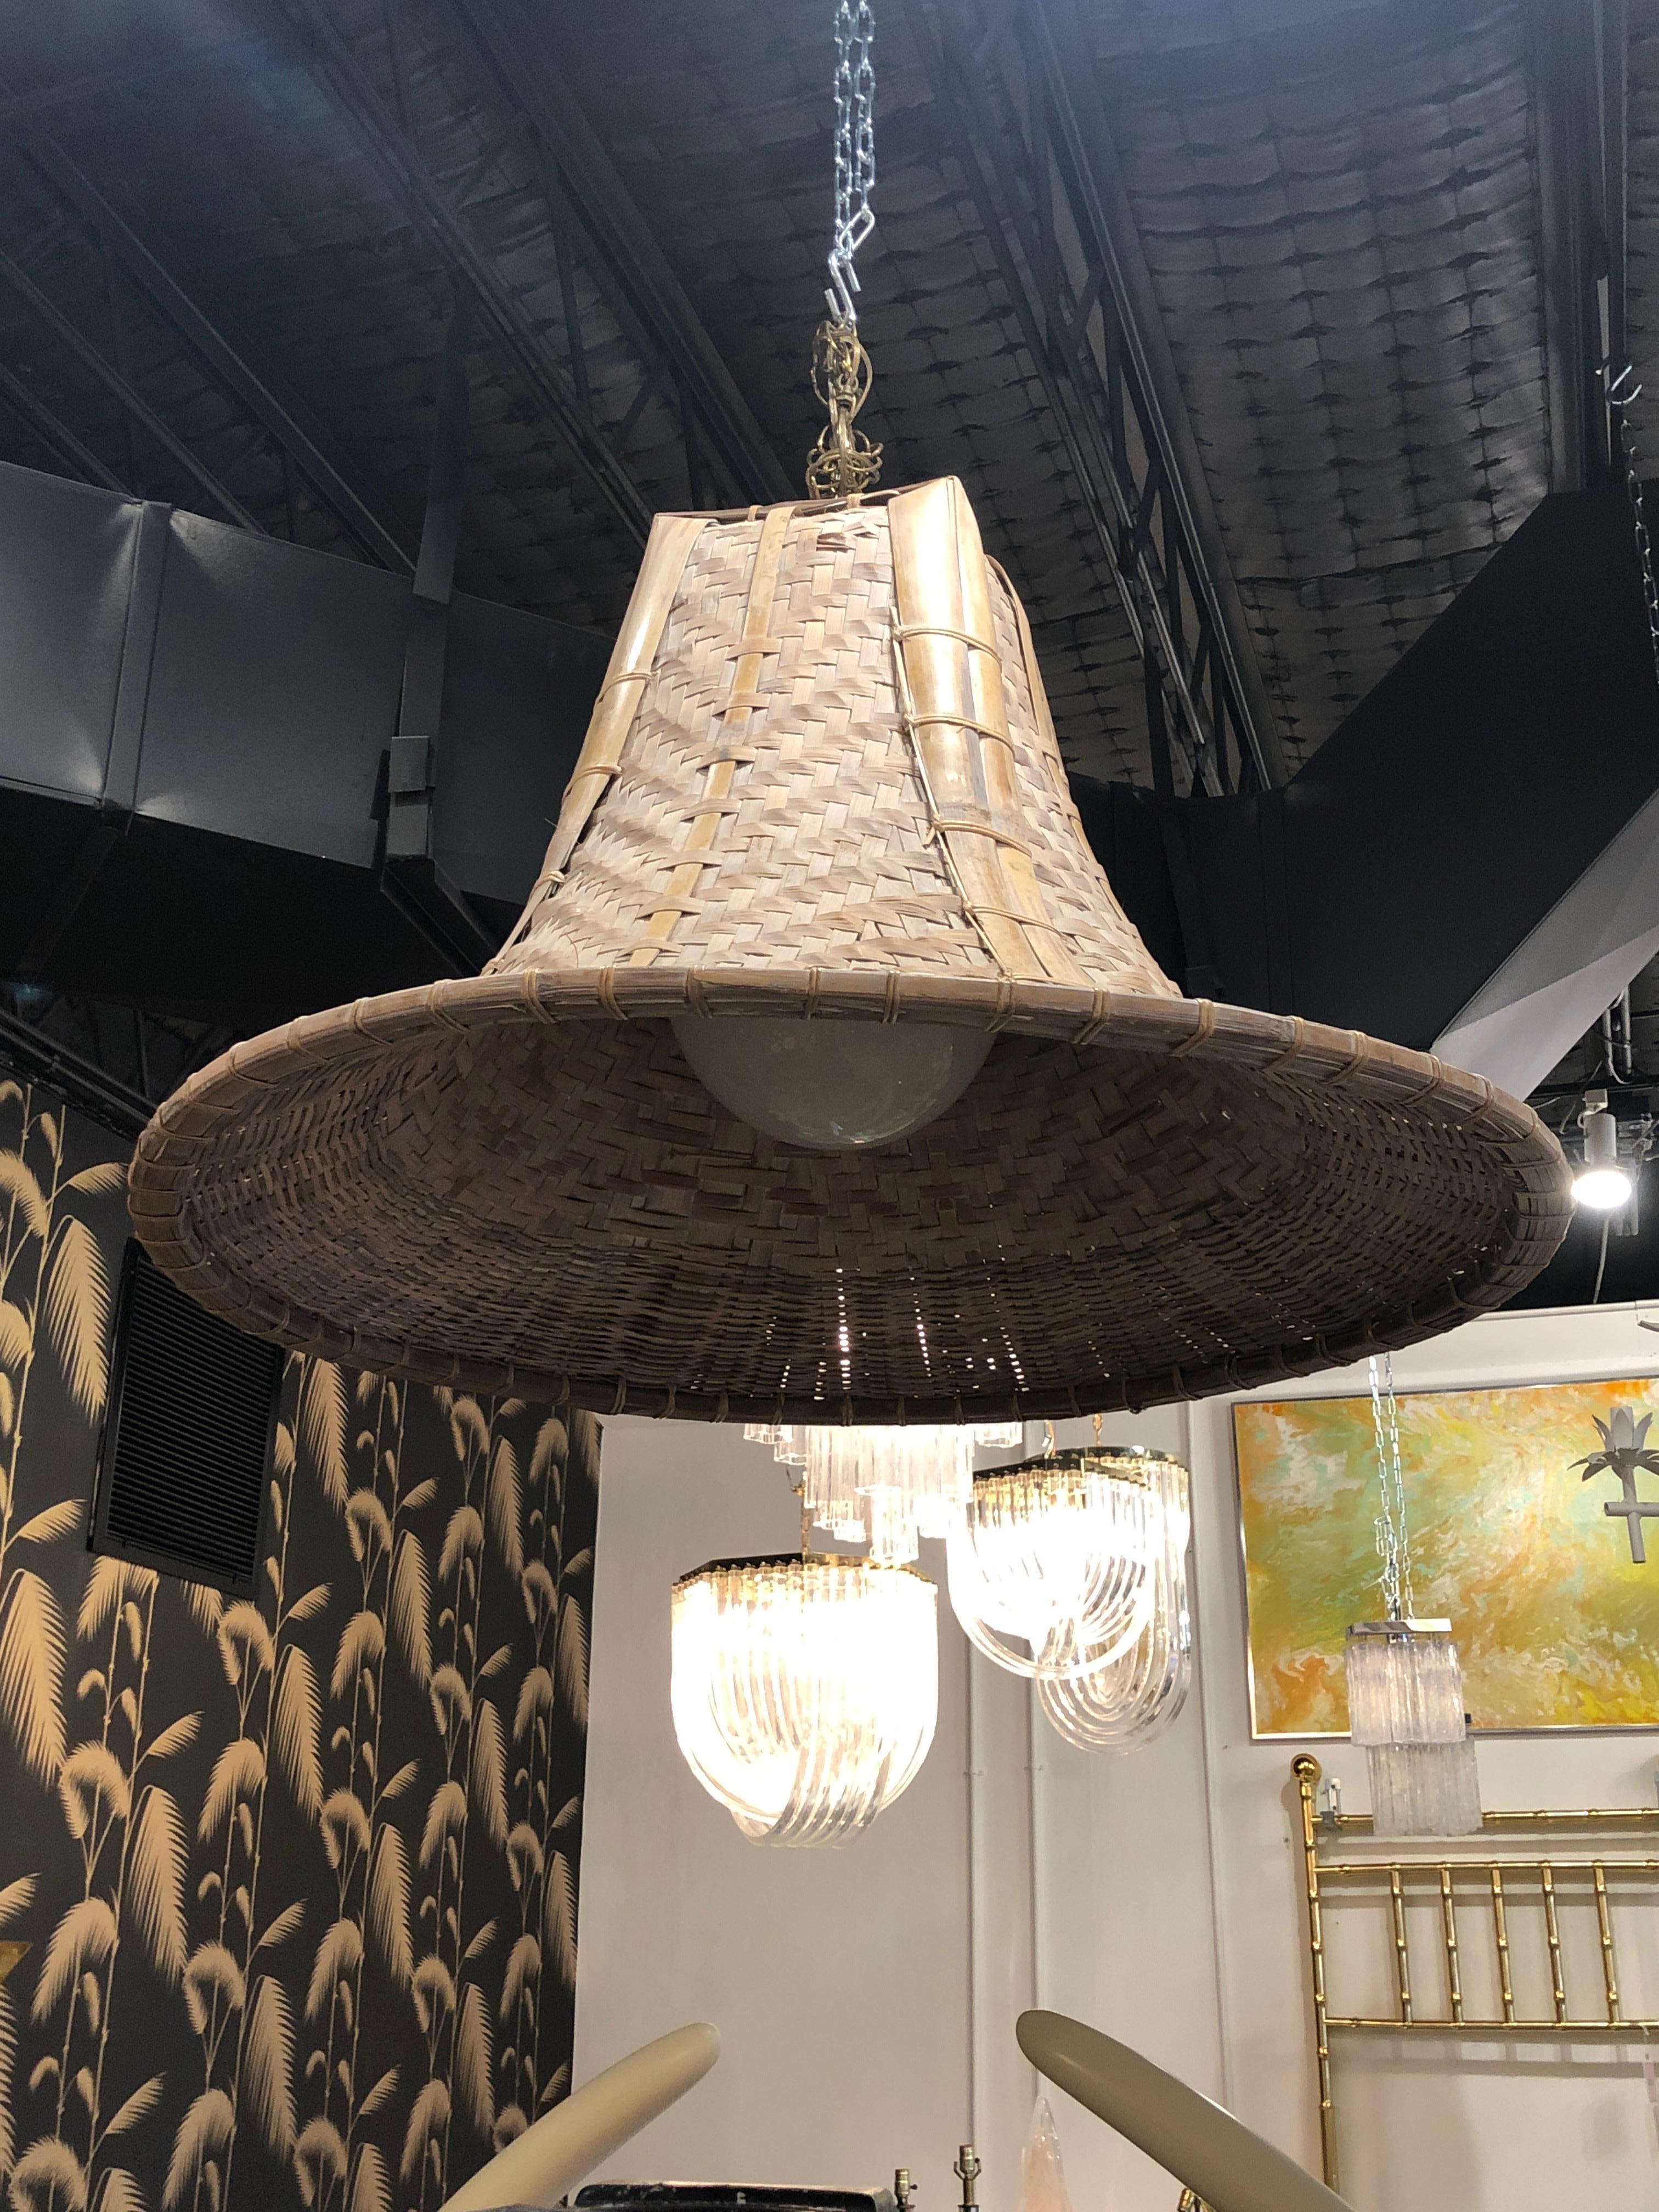 Uh-mazing! Vintage wicker and rattan chandelier. Measures: 36' diameter. Statement piece! Comes with chain, ceiling cap and globe light cover (inside). This could be lacquered or stained if you desired another color.